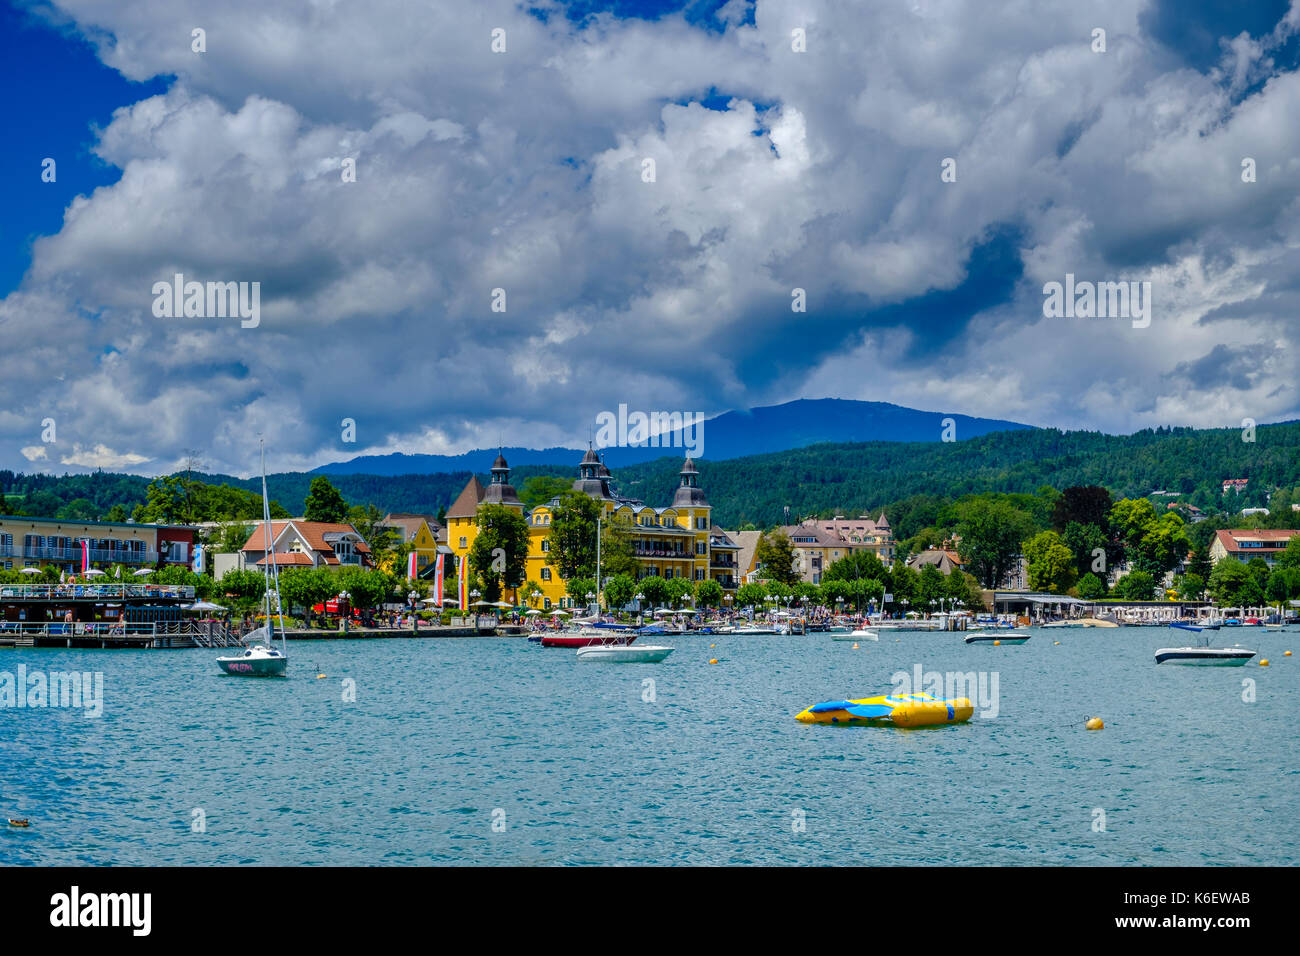 The harbour of town with sailing boats at Lake Wörth, Wörthersee, Carinthia's largest lake Stock Photo